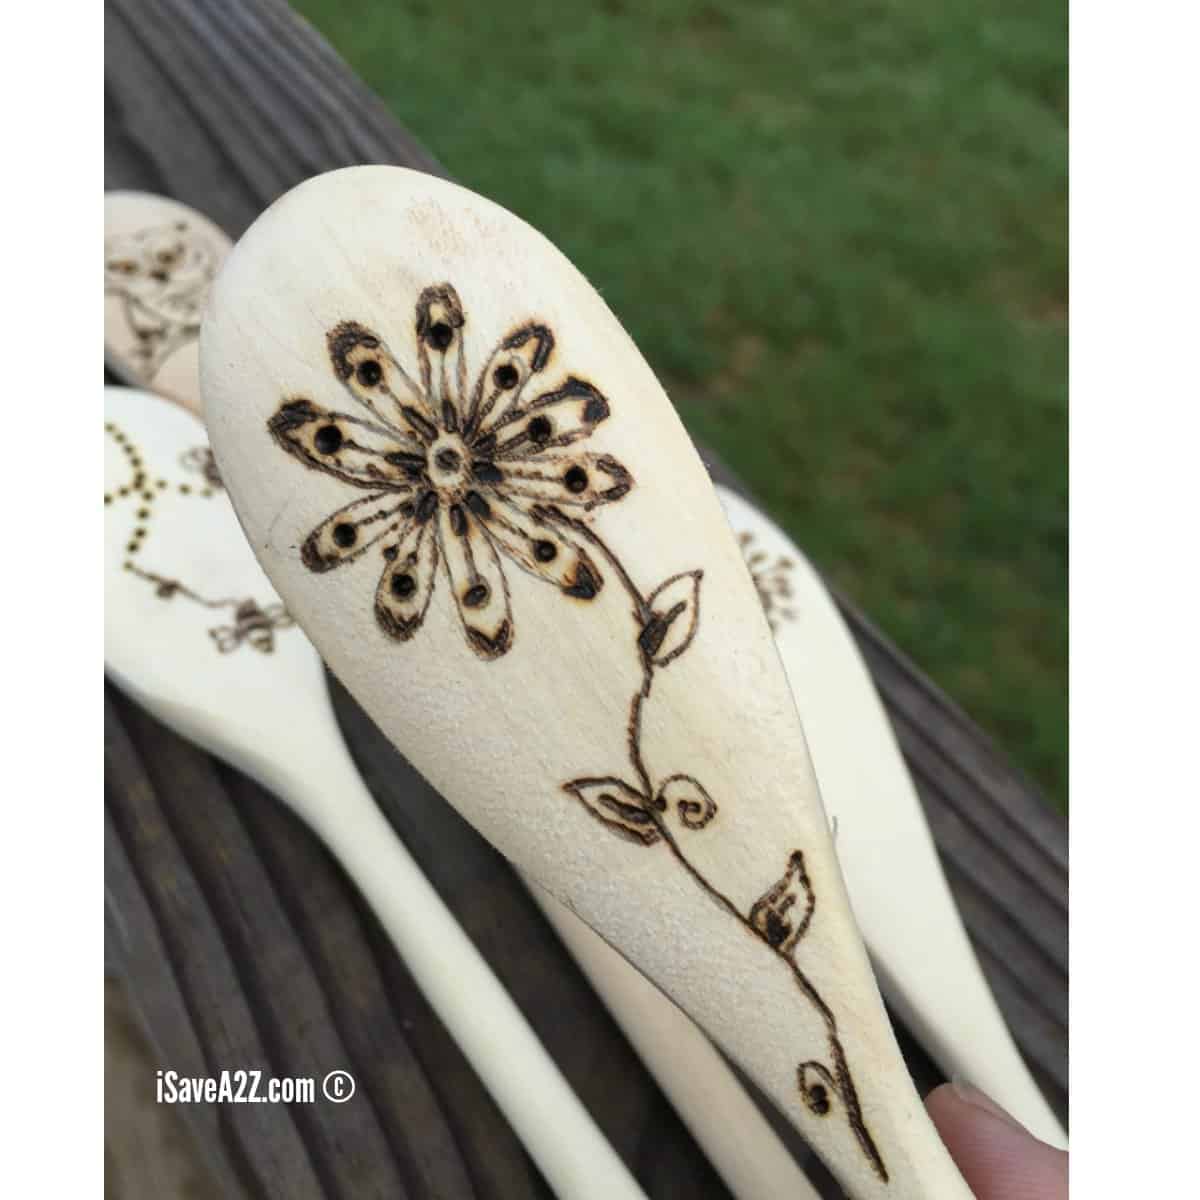 How to Burn Designs on Wooden Spoons